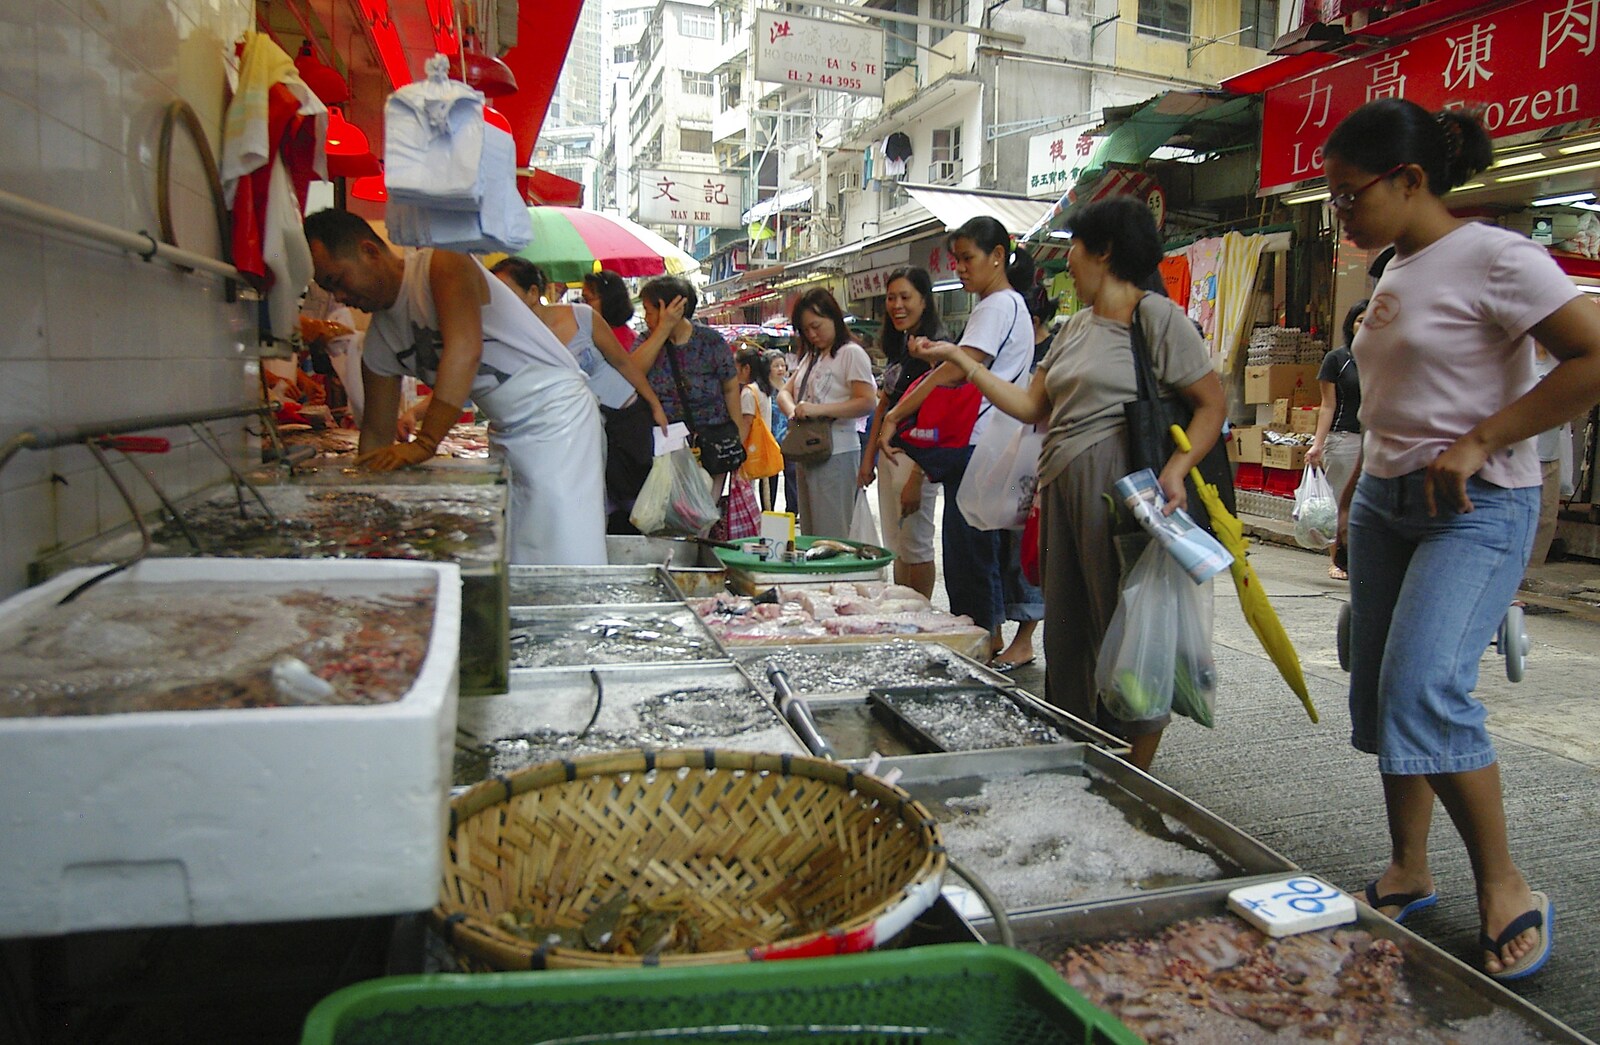 There are open tanks of writhing fish from Lan Kwai Fong Market, Hong Kong, China - 4th October 2006